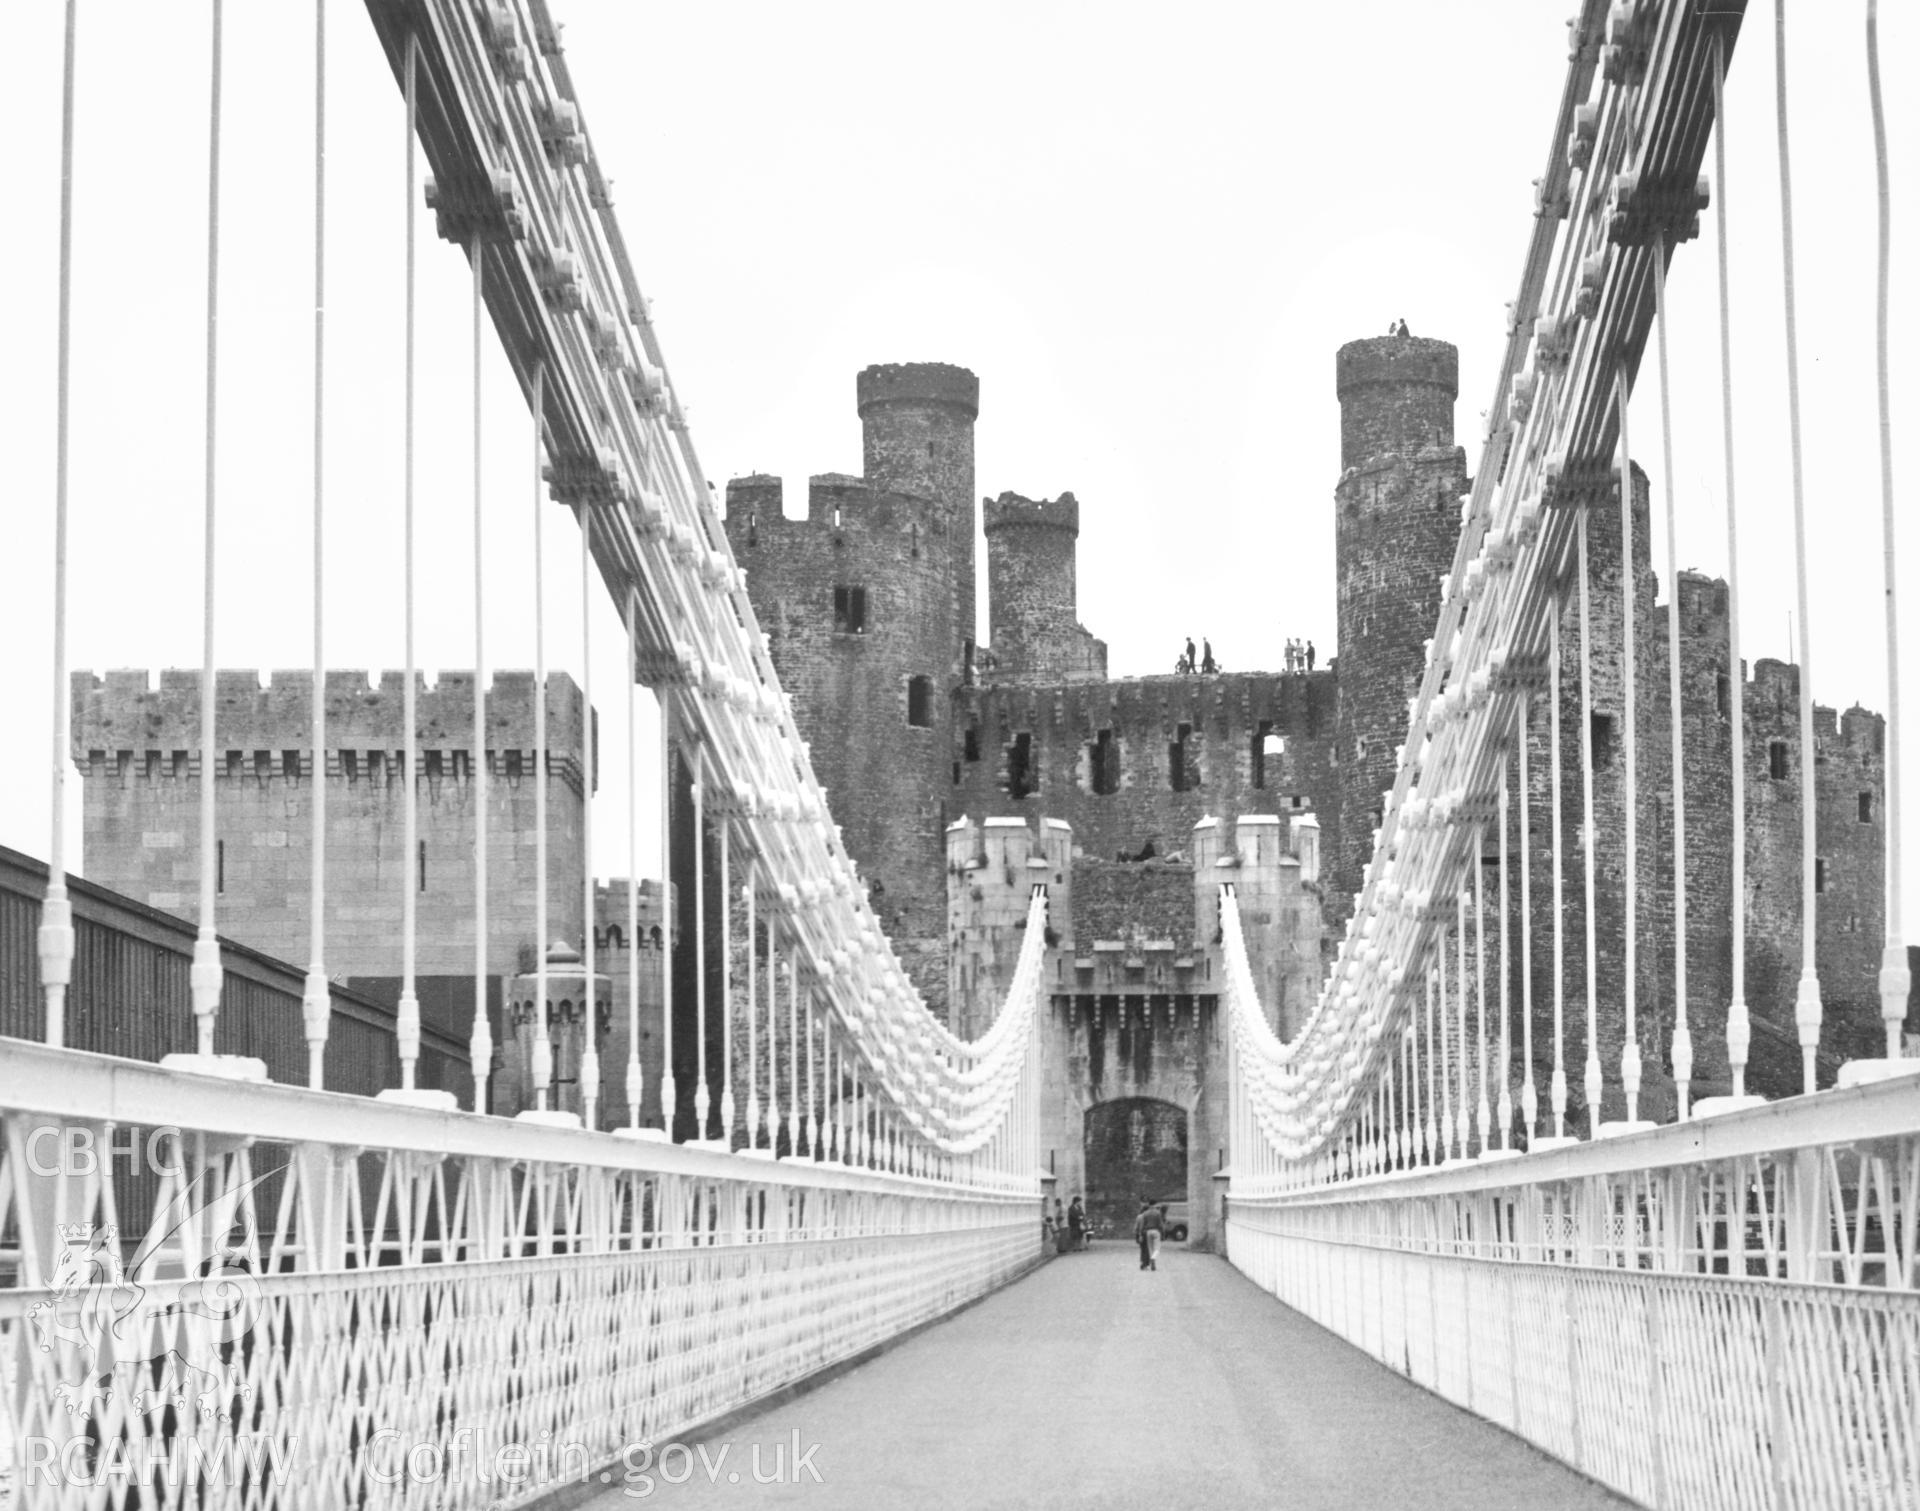 1 b/w print showing view of Conwy castle, collated by the former Central Office of Information.